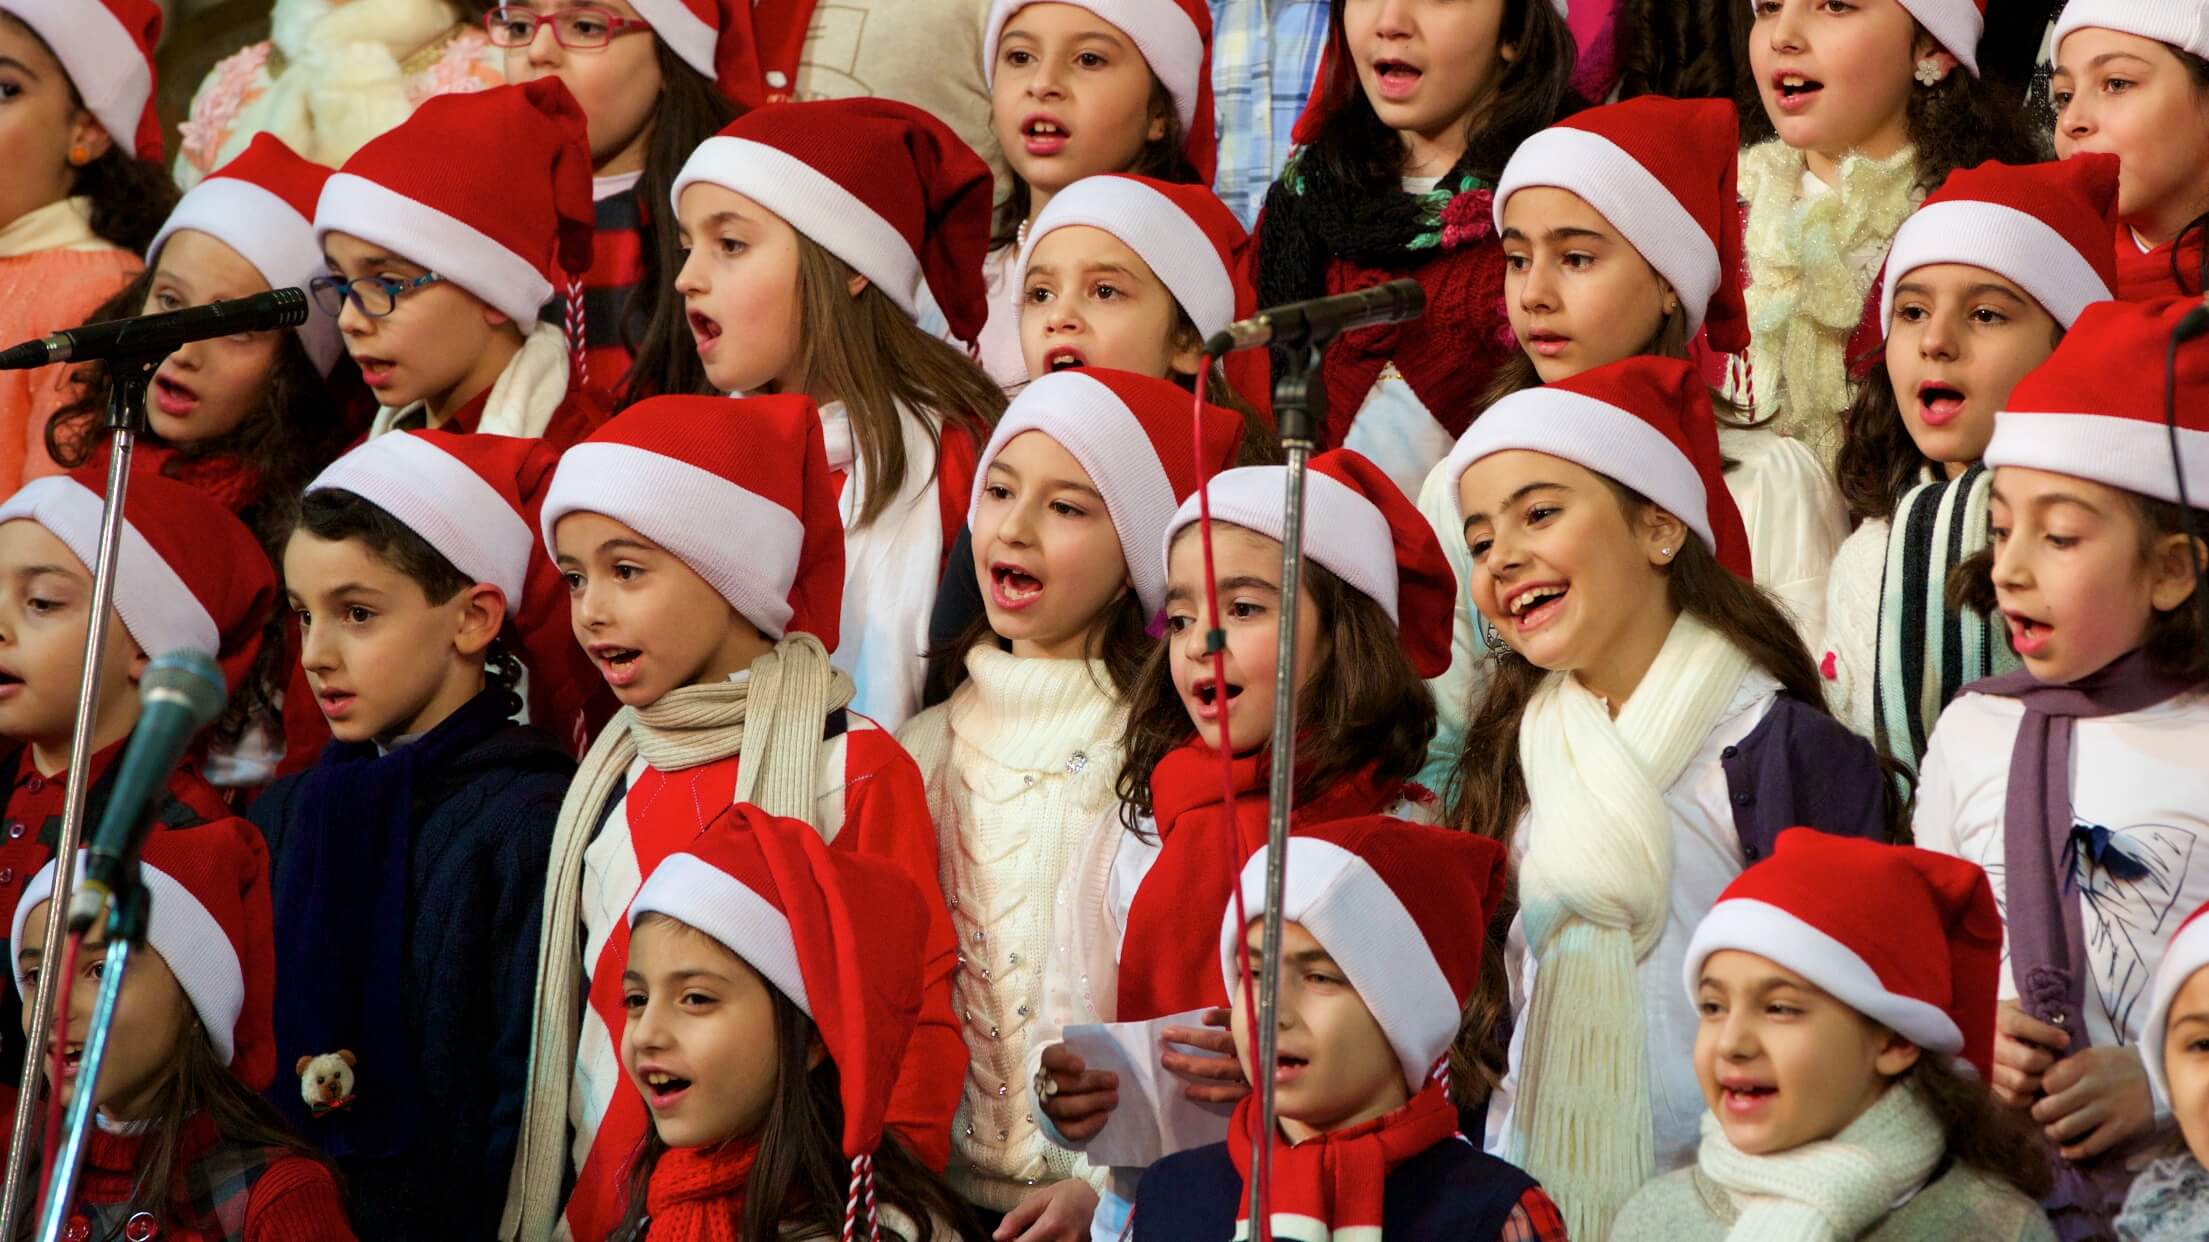 150 Syrians from the Coeur-Joie choir perform an exceptional concert tour in France.